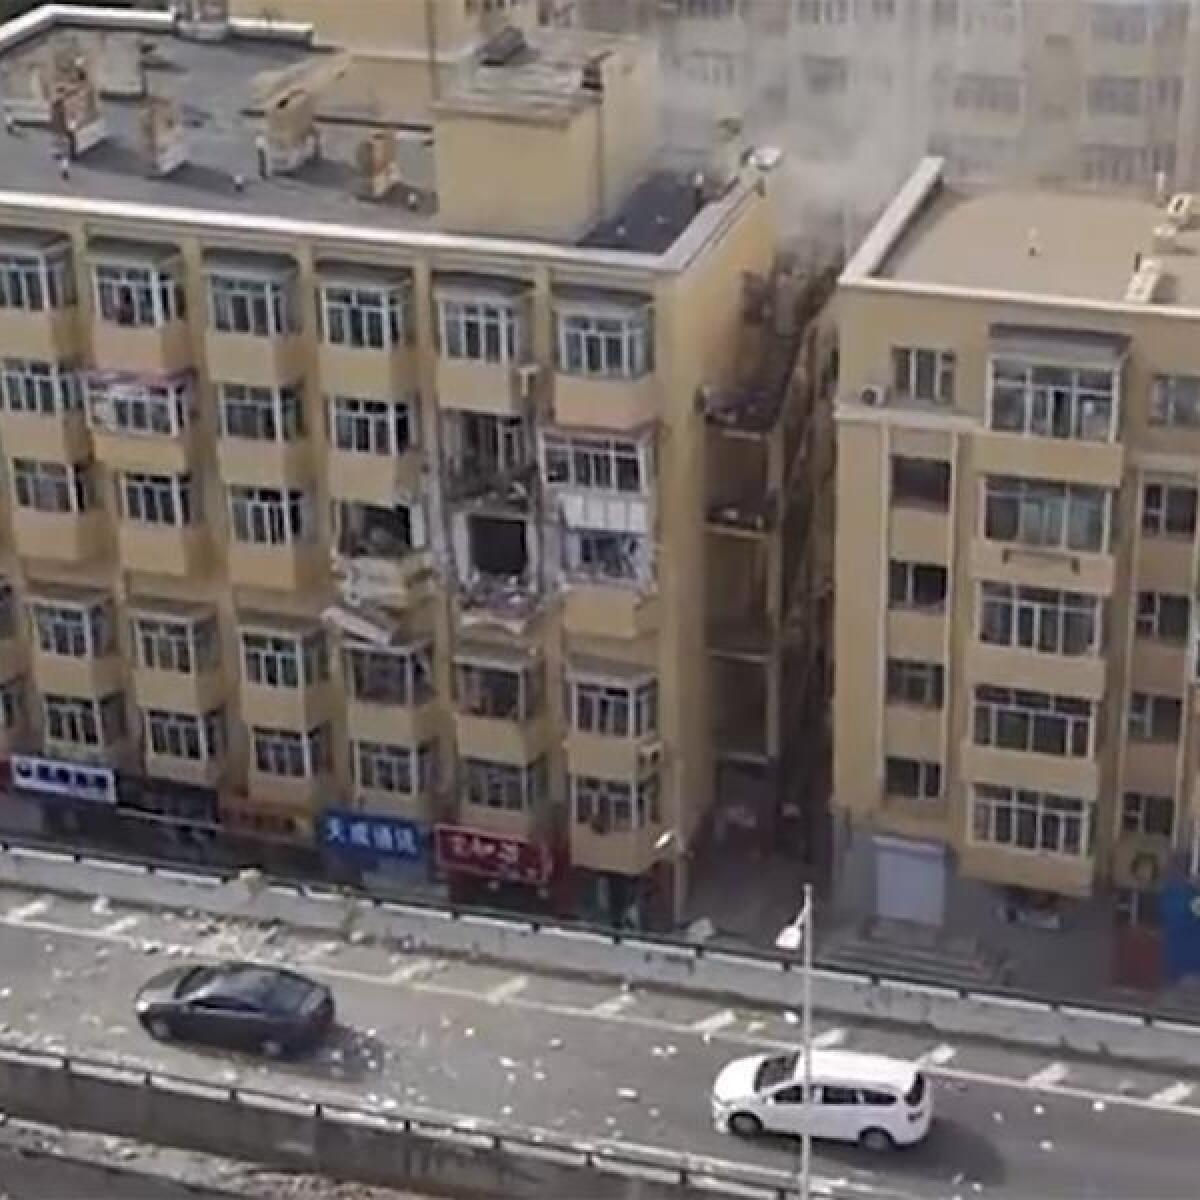 Aftermath of an explosion at an apartment building in China